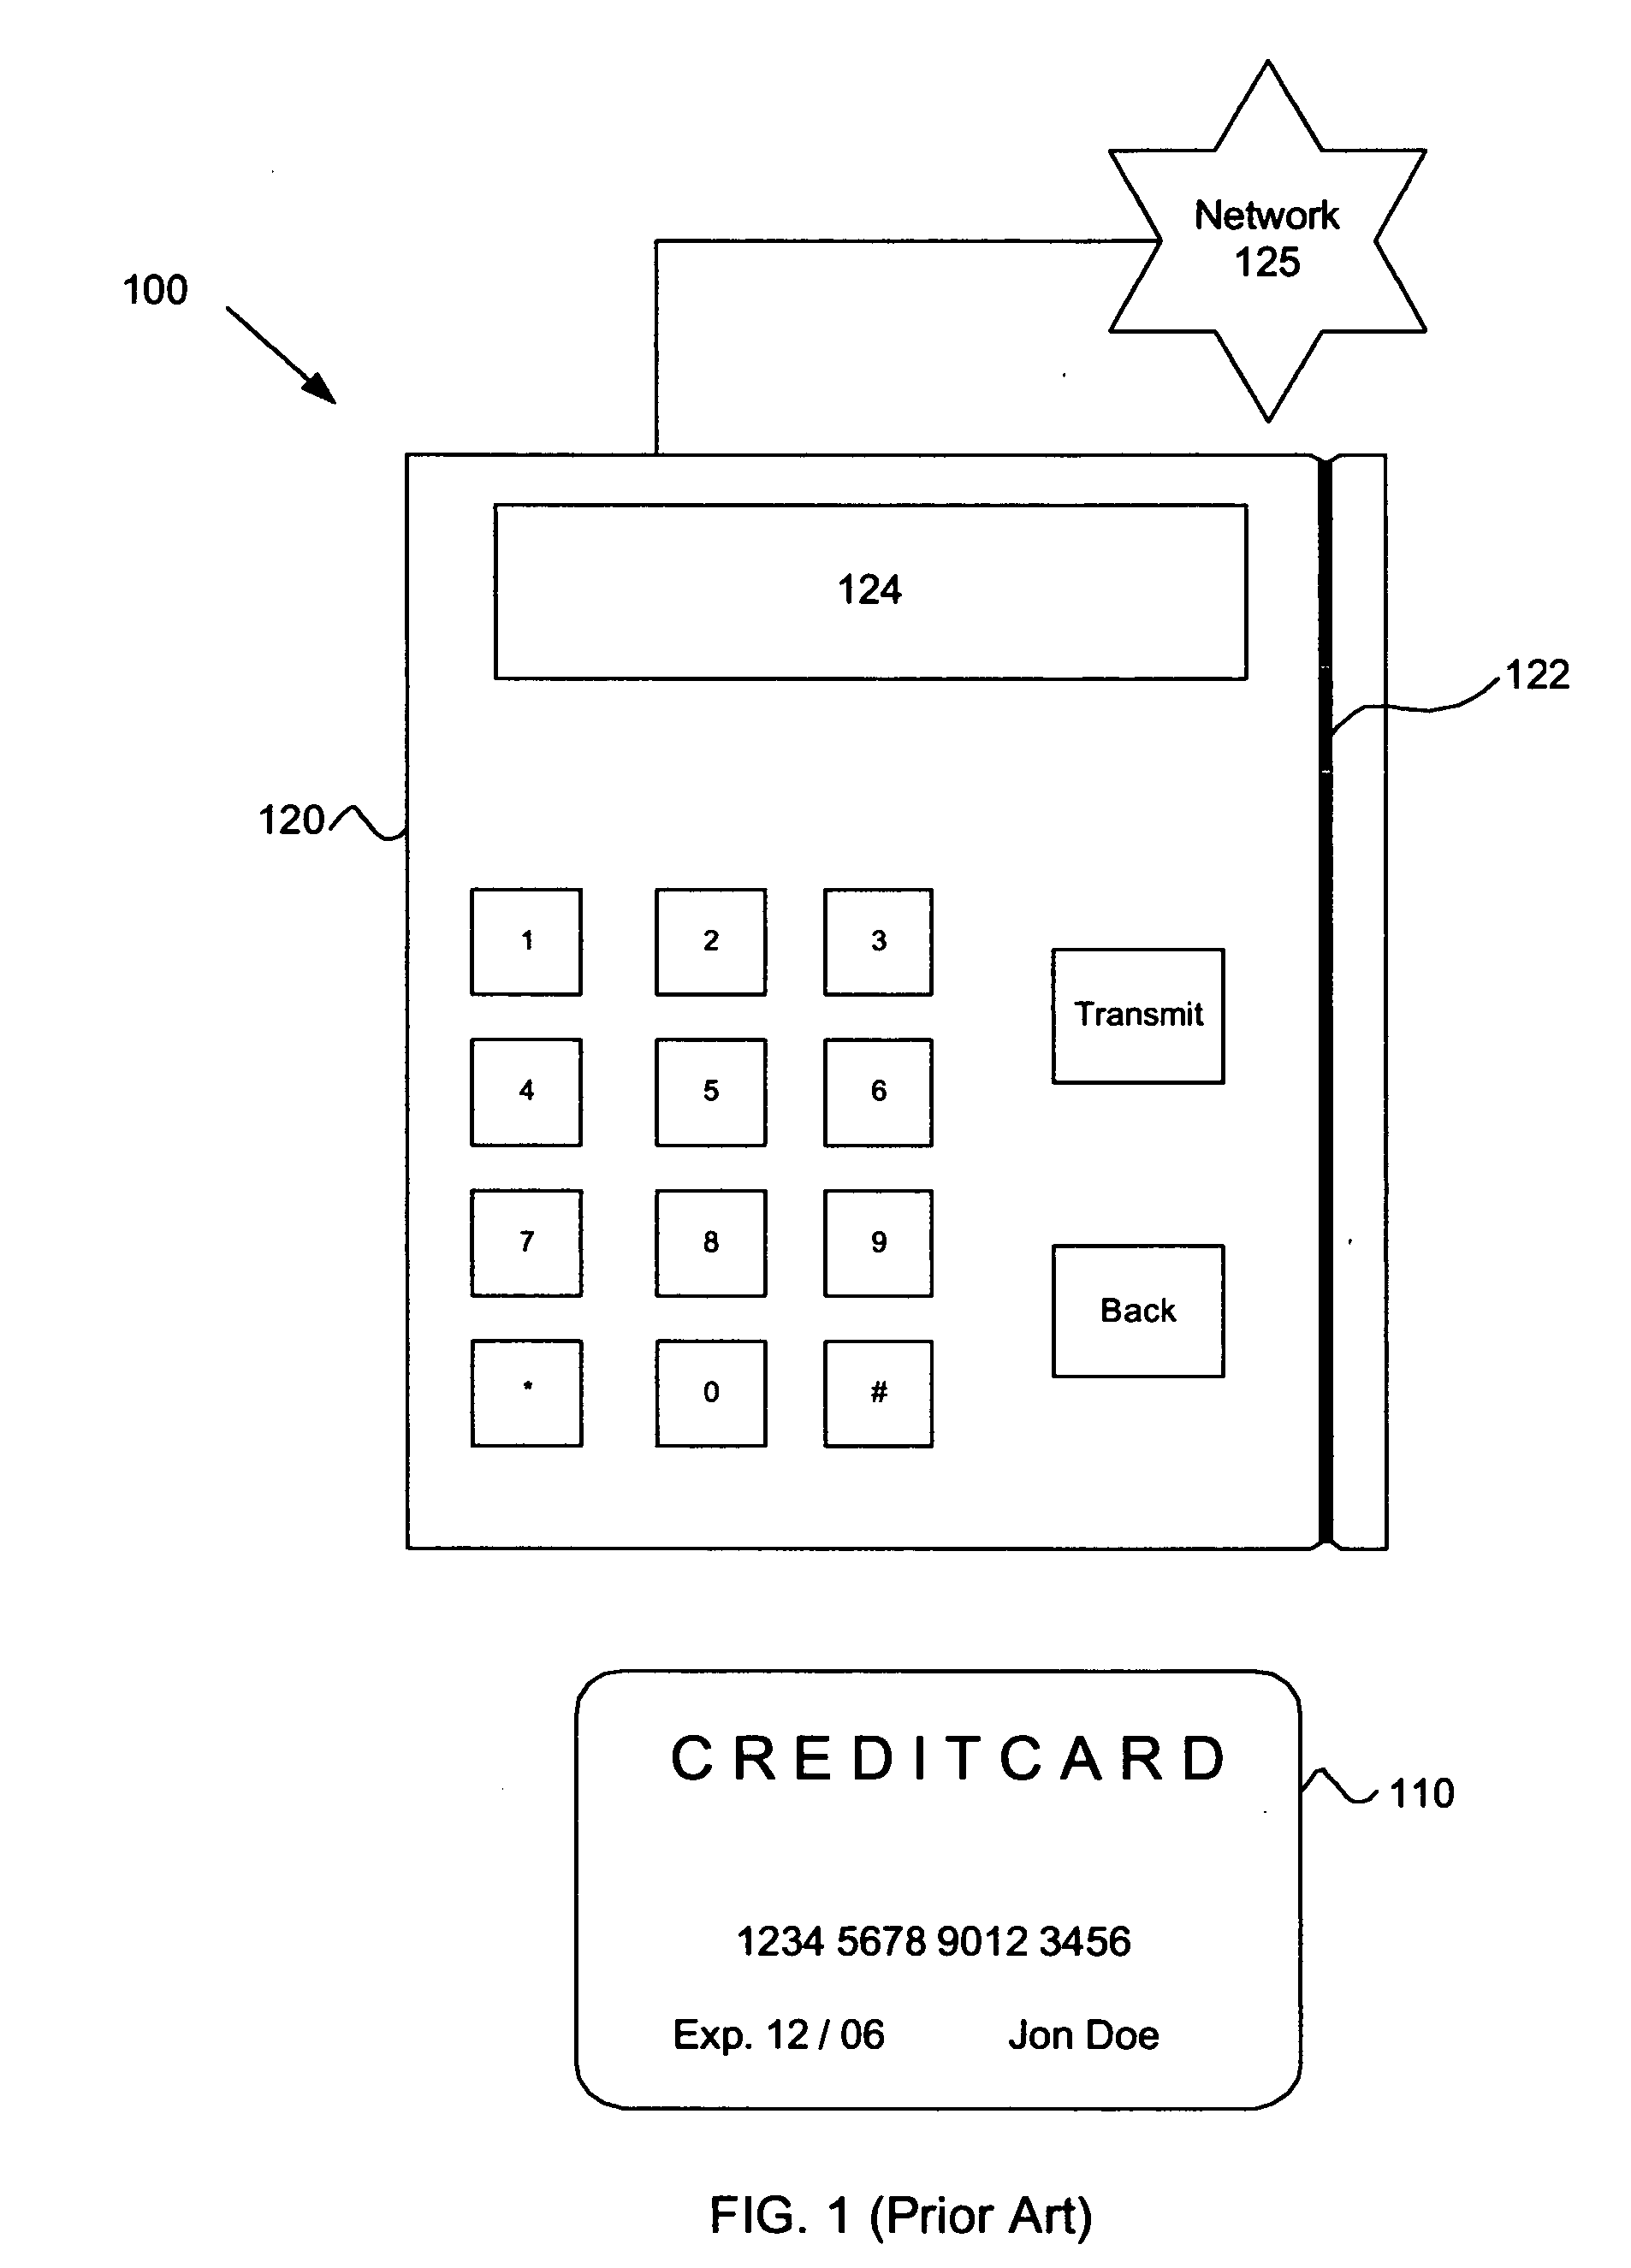 Bio-metric smart card, bio-metric smart card reader, and method of use